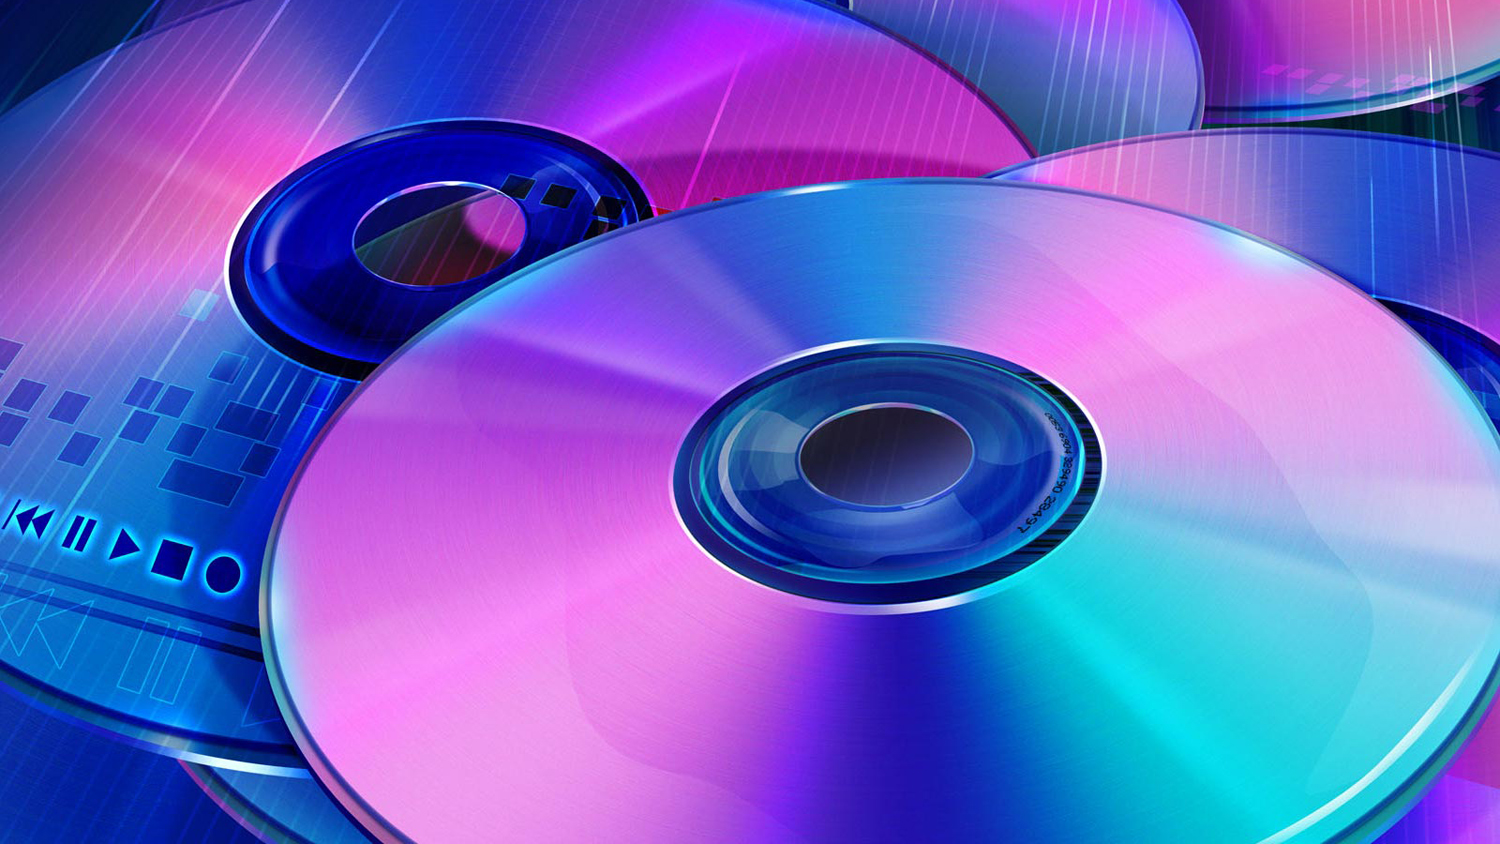 CDs are back! Compact disc sales just rose for the first time in